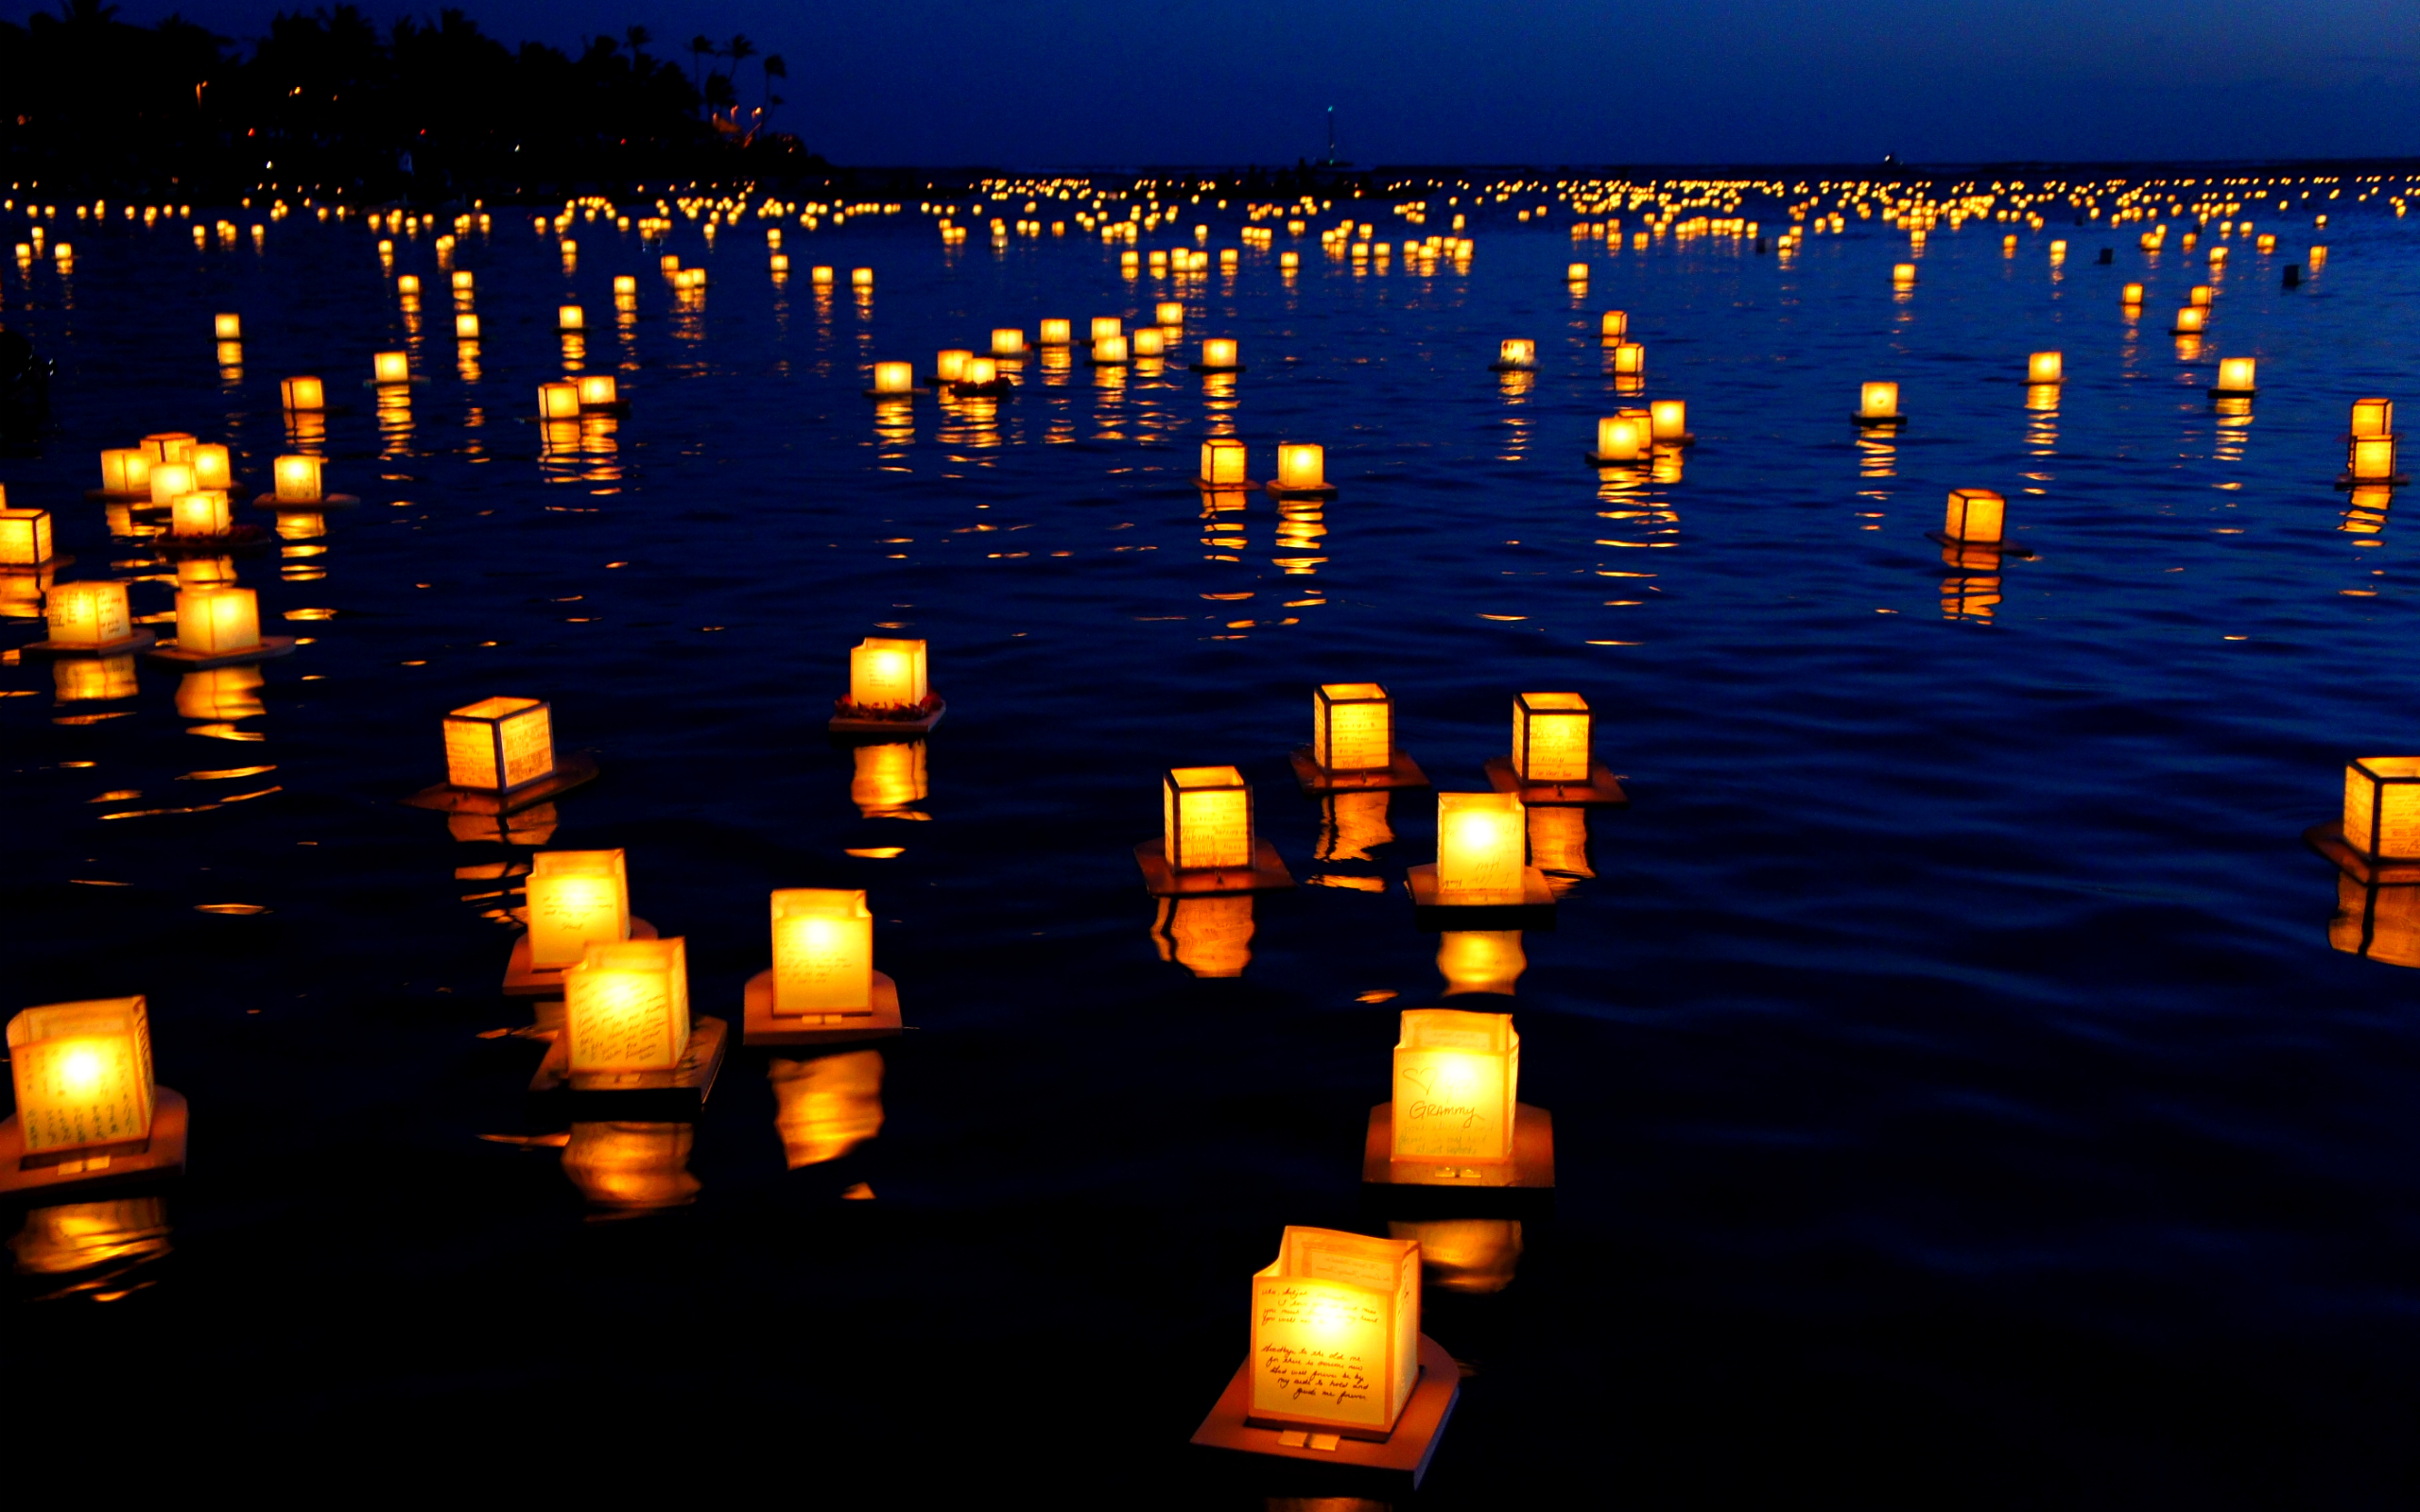 Wallpaper Festival Of Lights Floating Lanterns Is A Great